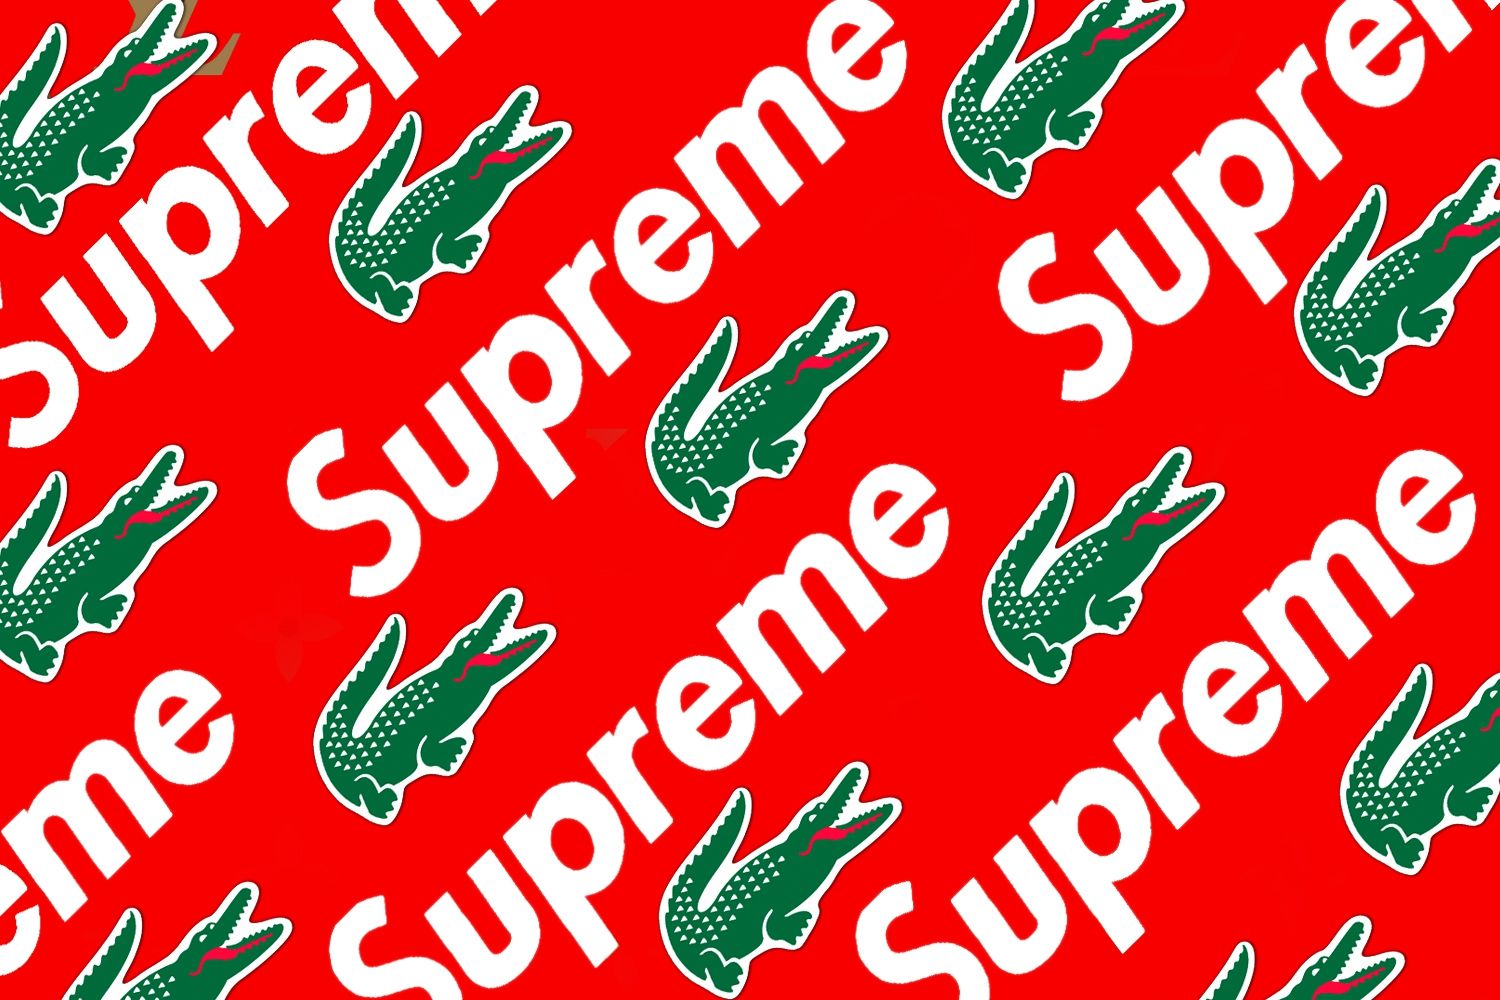 Supreme x Lacoste: Say bonjour to the third collaboration